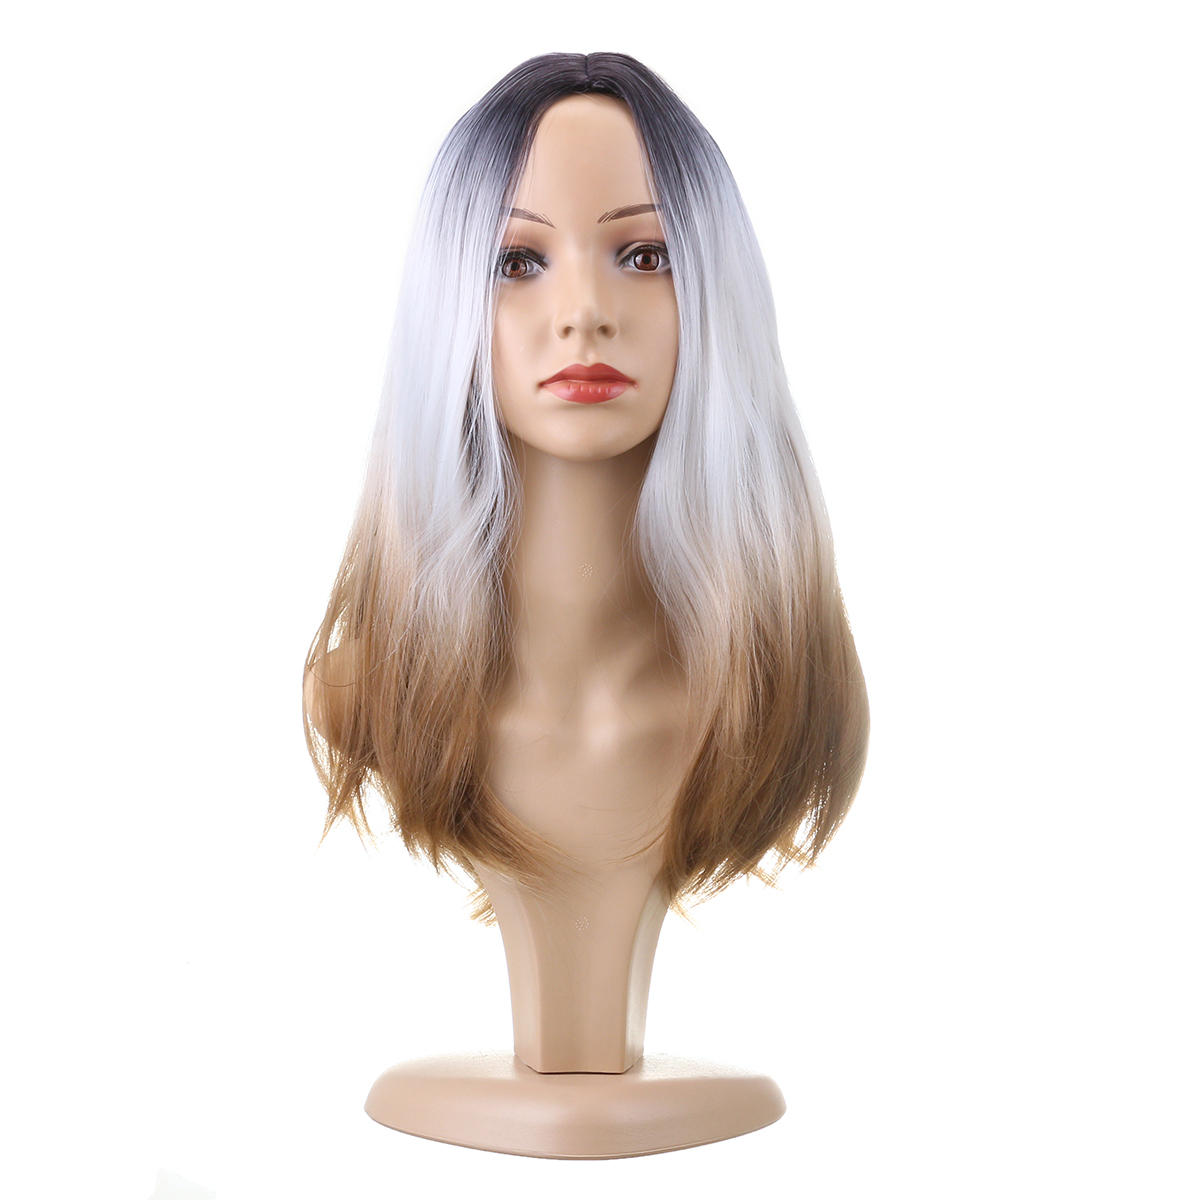 Hair 26 270g Long Synthetic Hair Wig Adjustable Ombre Grey Body Wavy Hair Wigs For Women Cosplay Heat Resistant 1PC, Banggood  - buy with discount